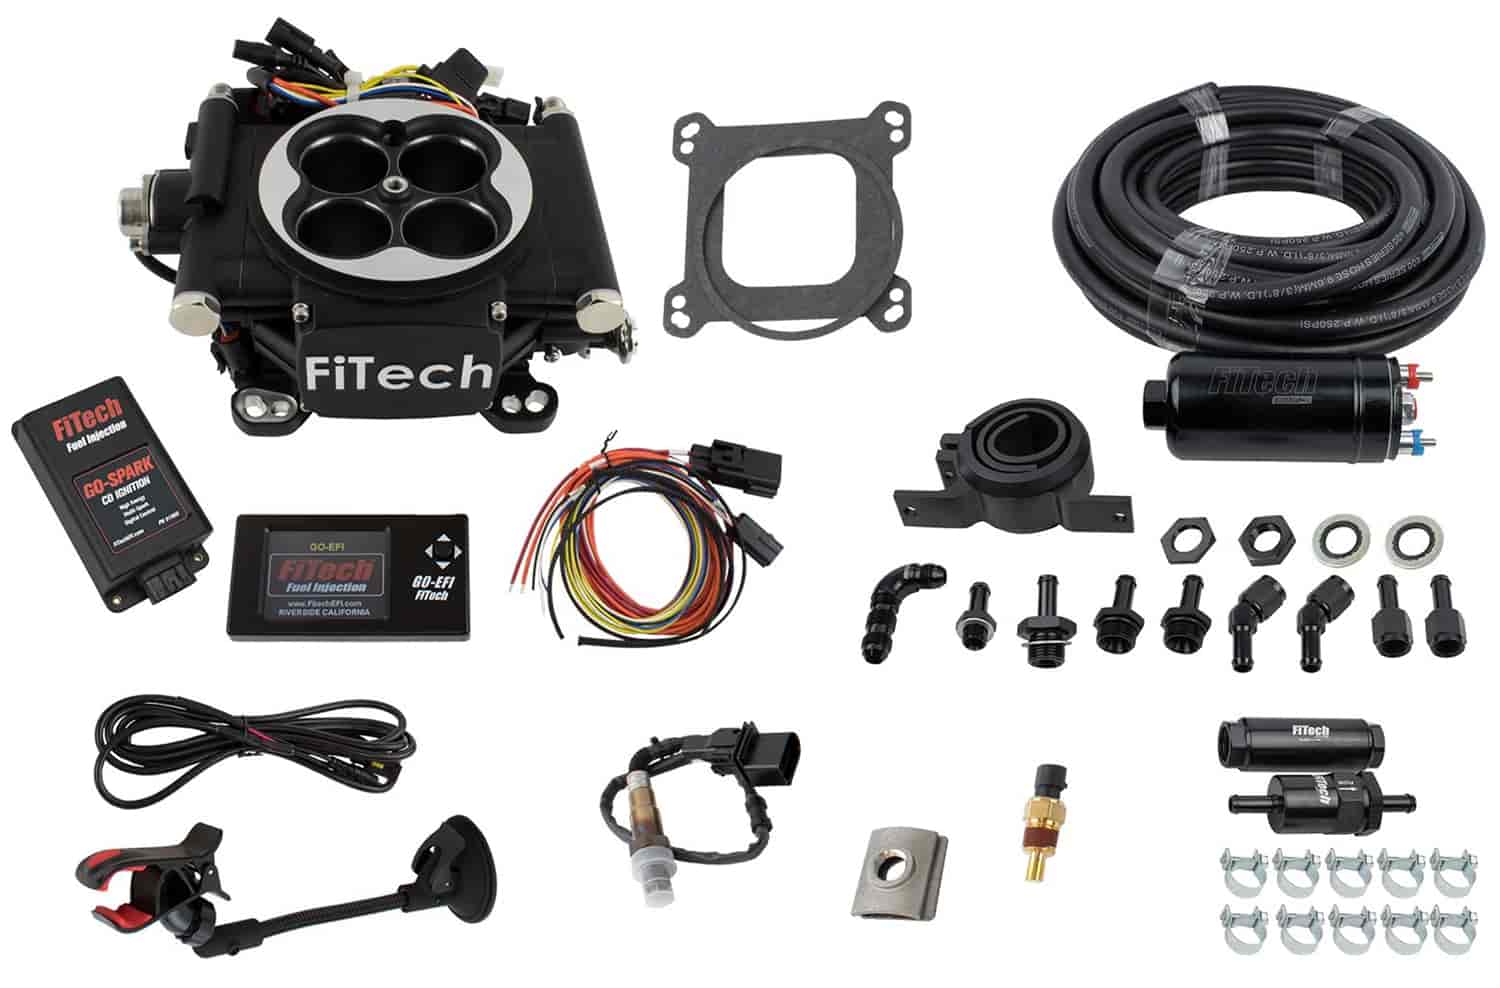 Go EFI-4 600 HP Throttle Body Fuel Injection Master Kit [In-line Fuel Pump and CDI Box] Matte Black